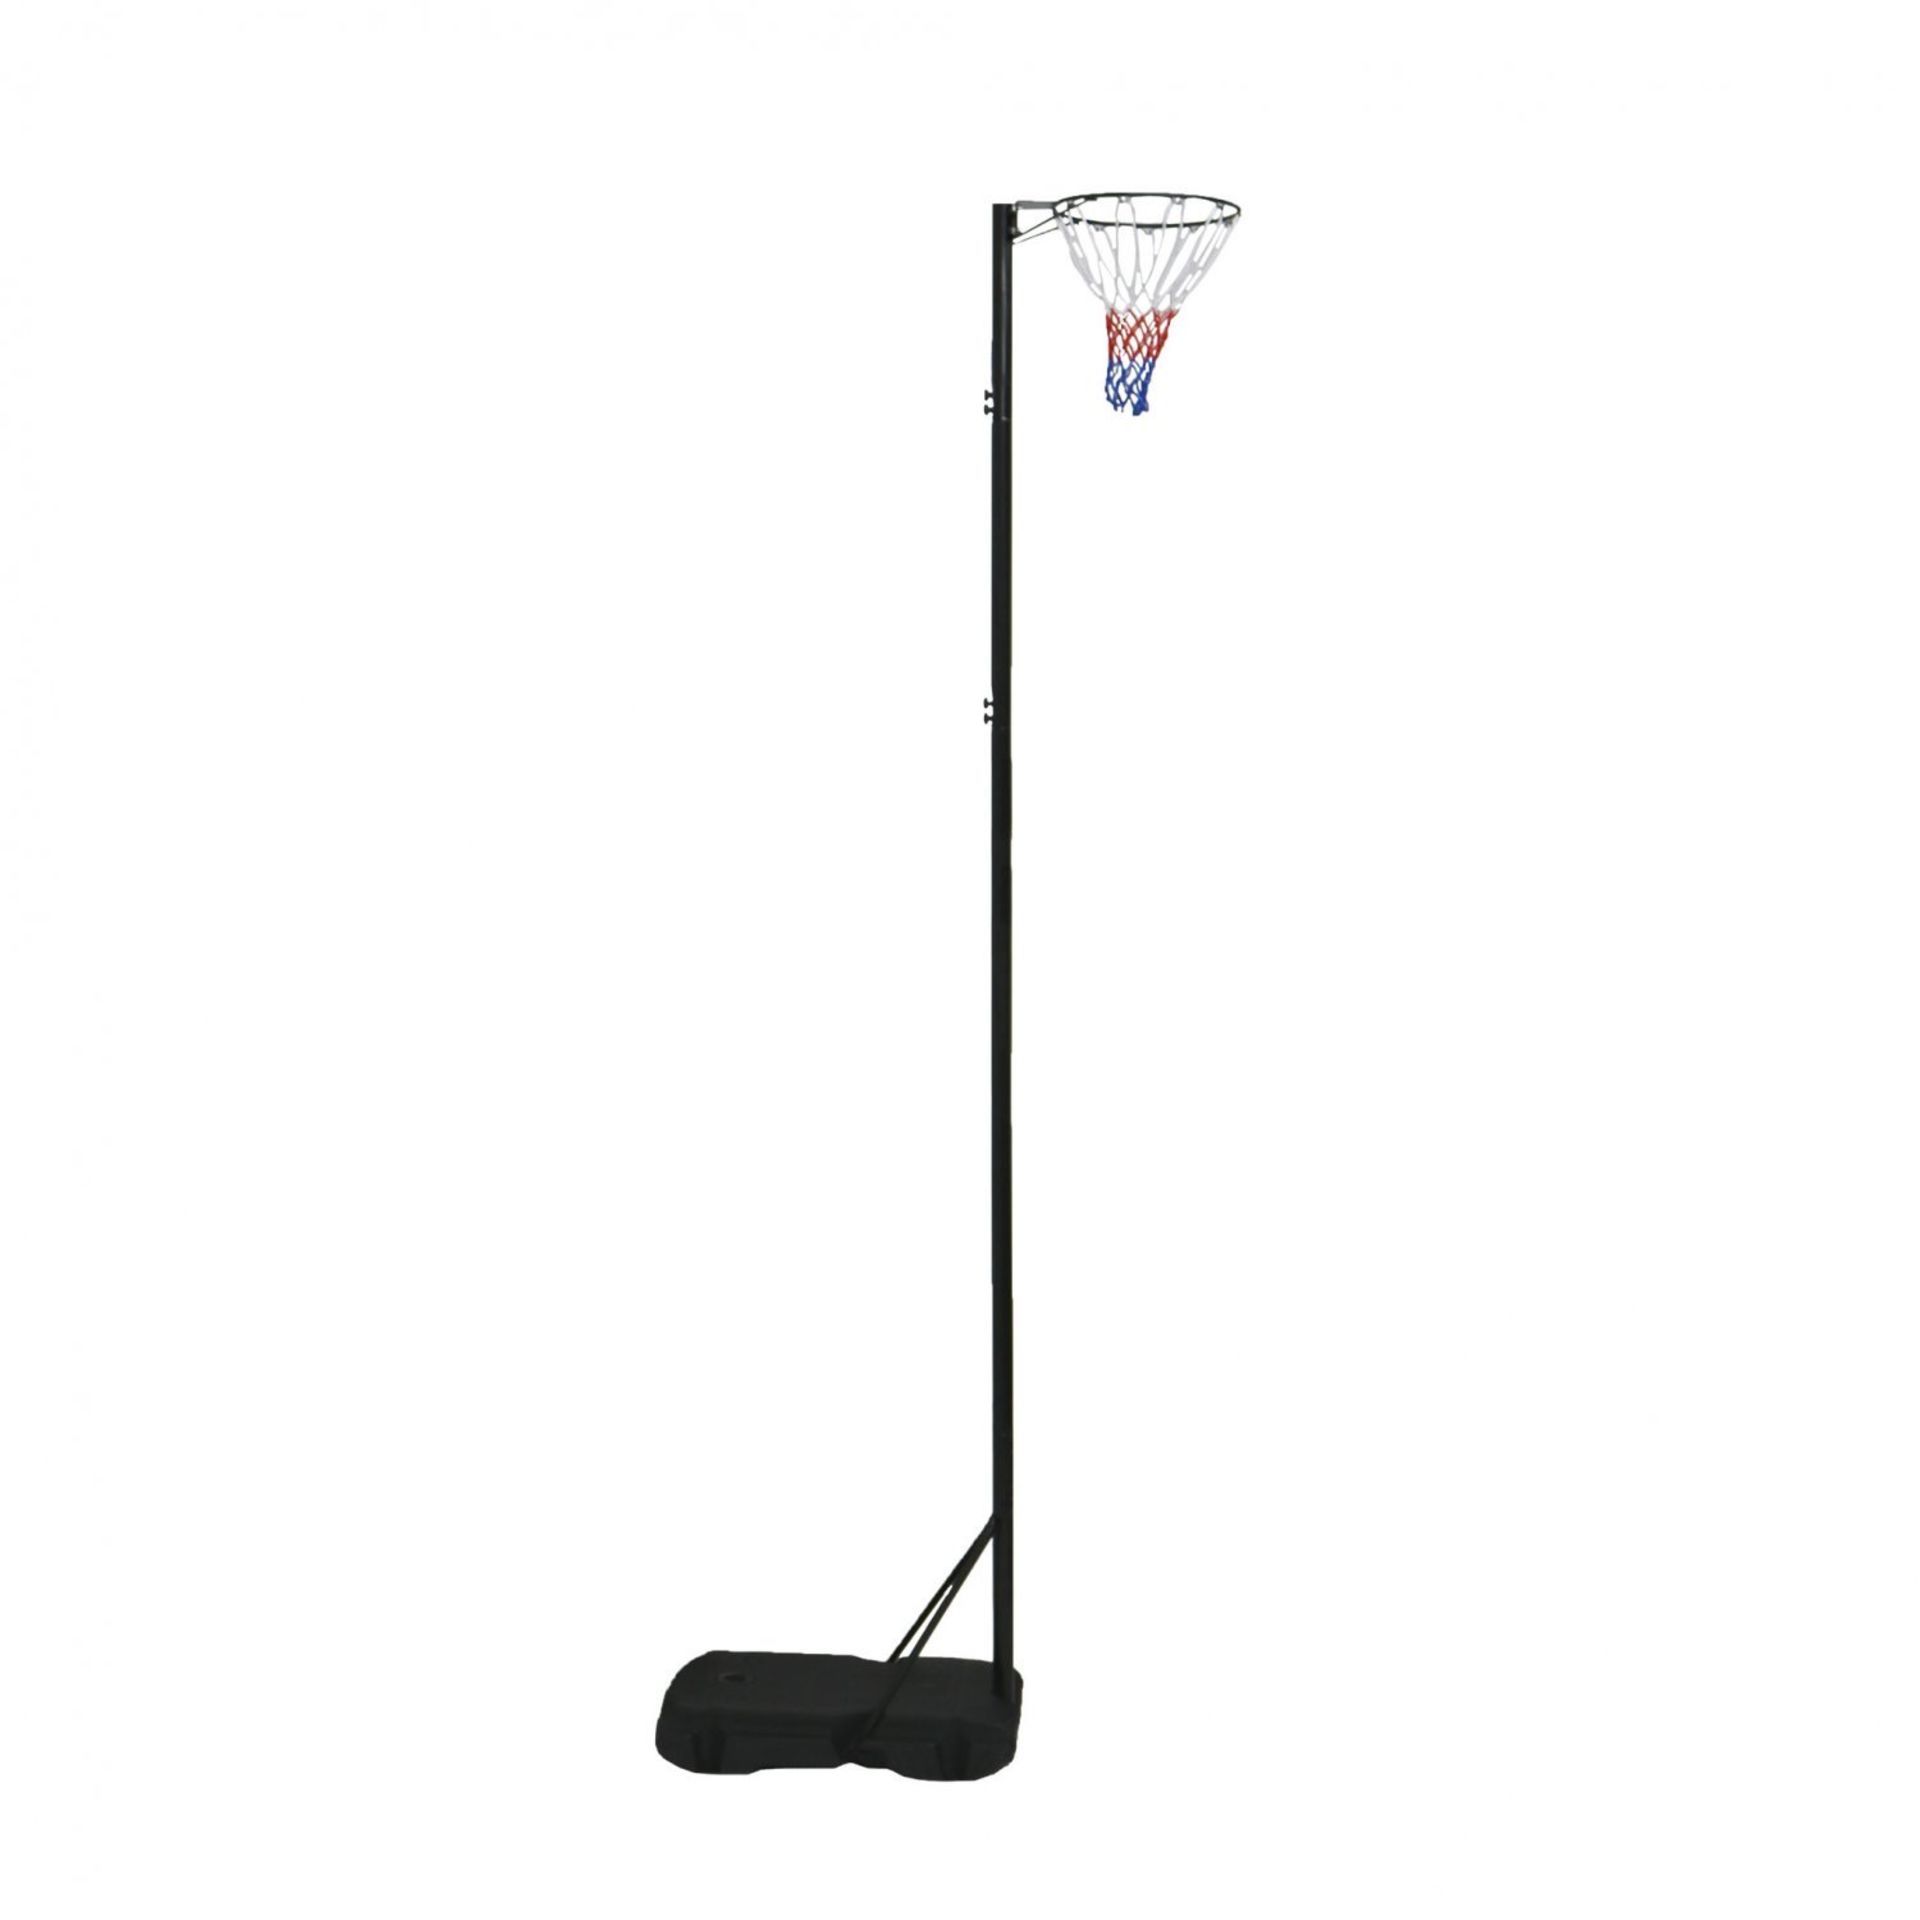 (RU316) Pro Adjustable Netball Net Post - Black, 3.05m With 3 adjustable heights our netball p... - Image 2 of 2